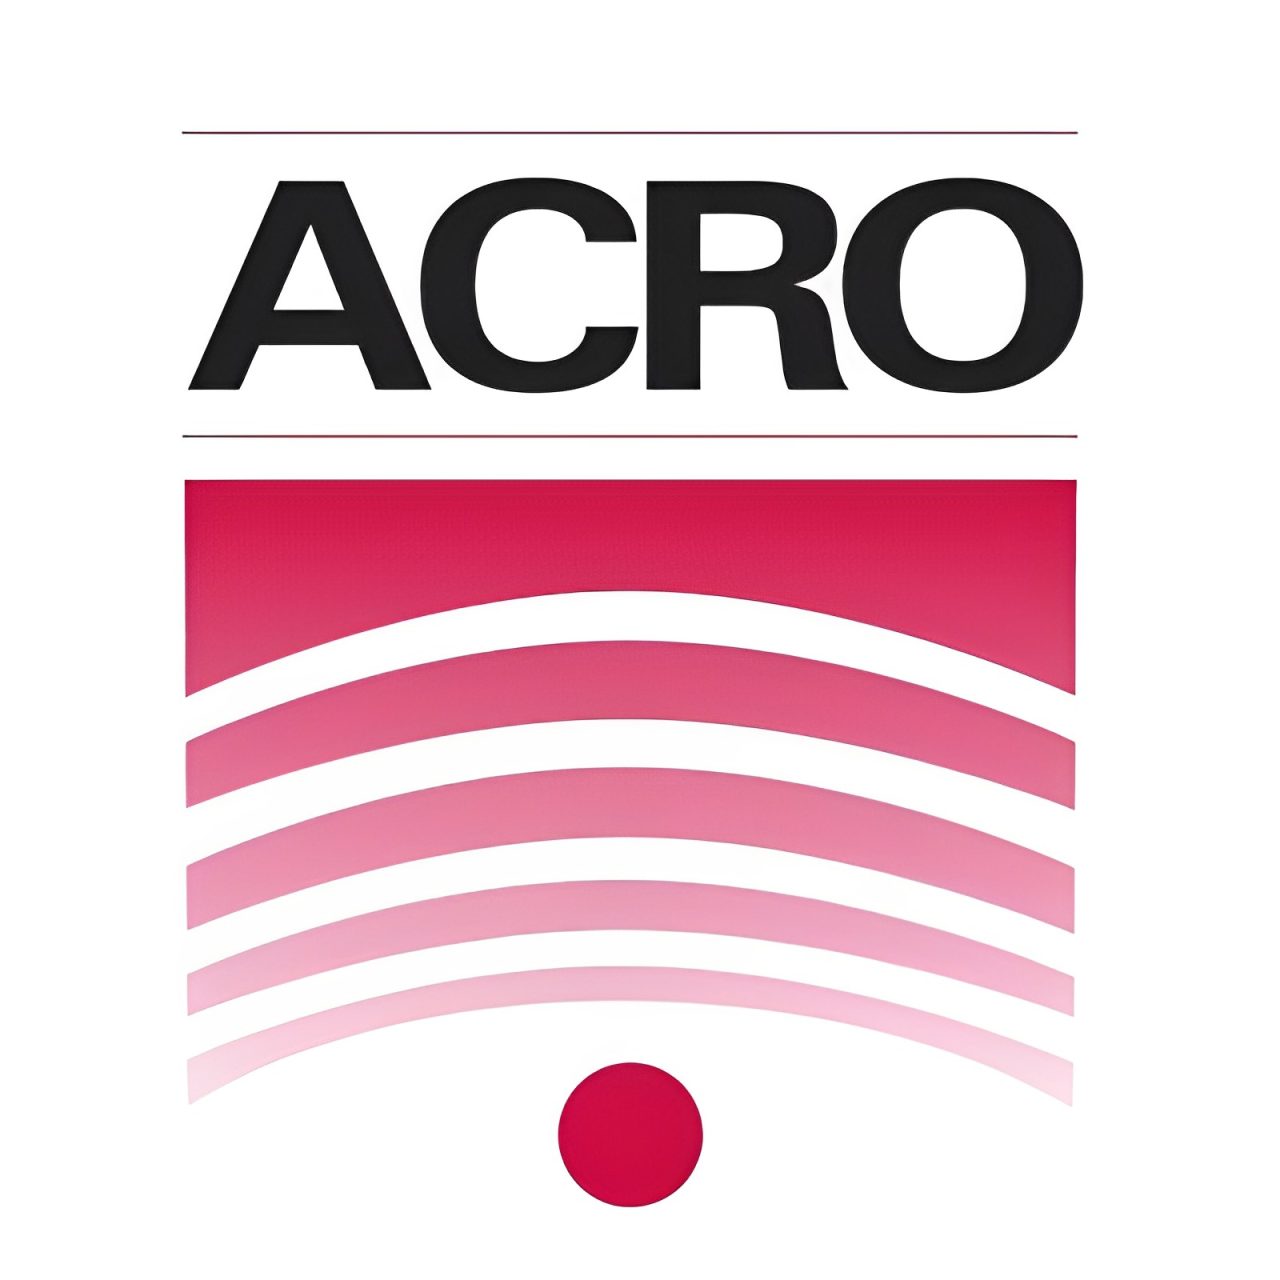 We have the new ACRO Deck from the ACRO resident committee! – ACRO – American College of Radiation Oncology